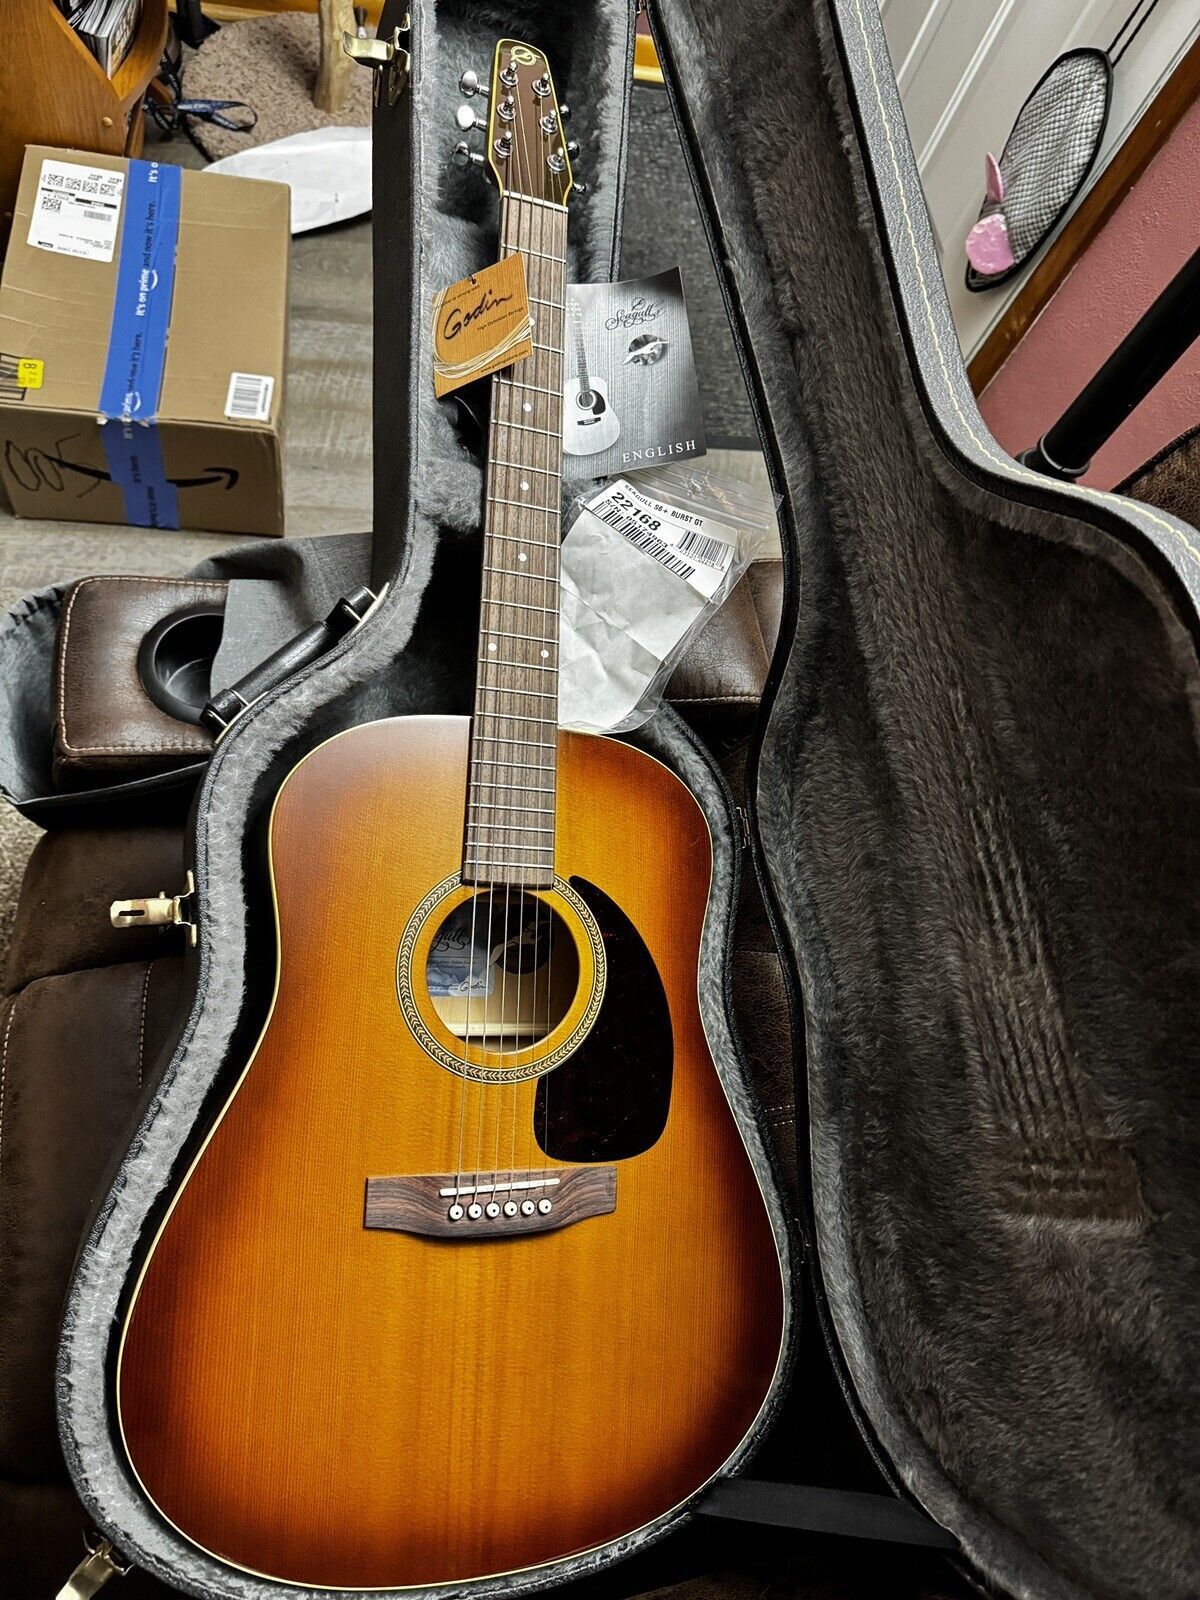 Seagull S6 Tobacco-Burst Acoustic Guitar With Hard Case And Ower Book 1